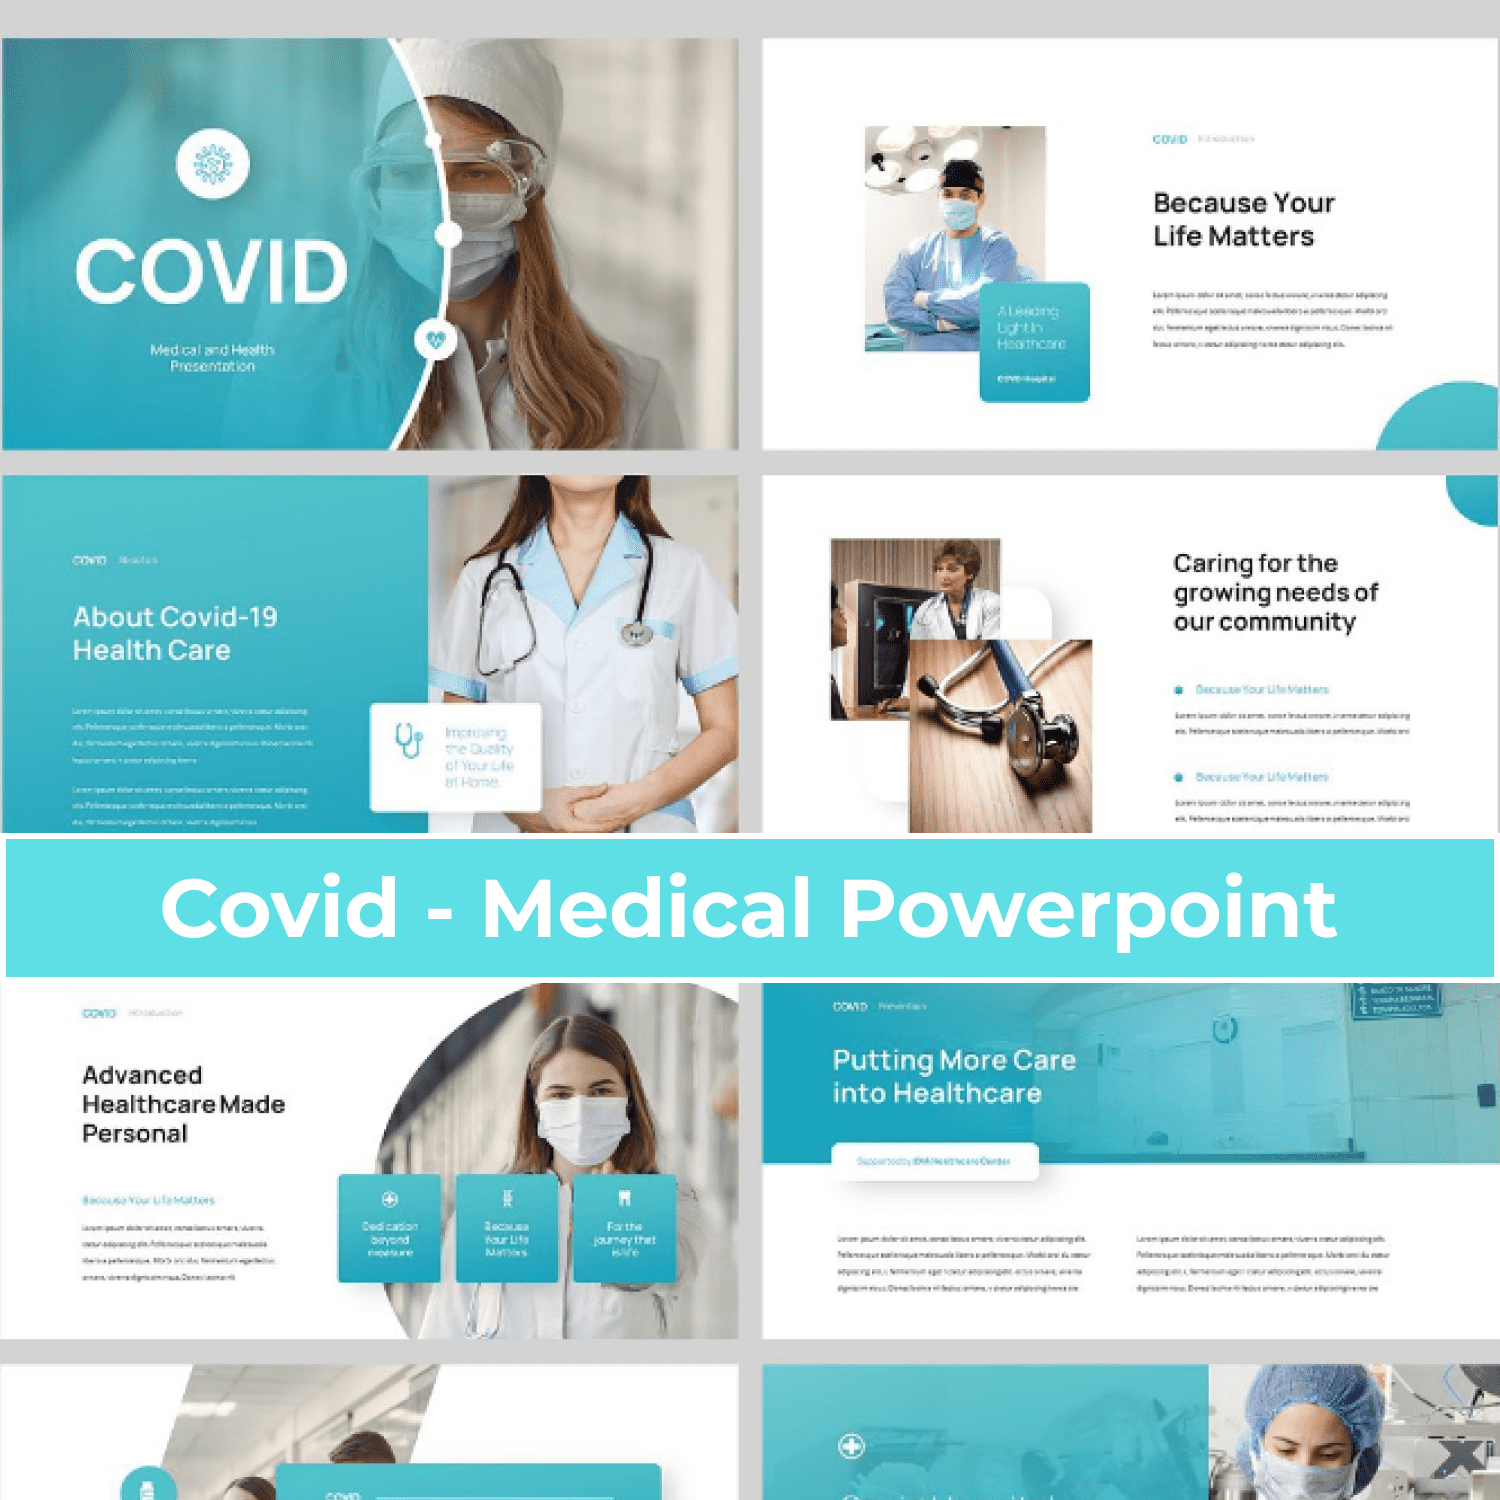 Covid - Medical Powerpoint cover image.